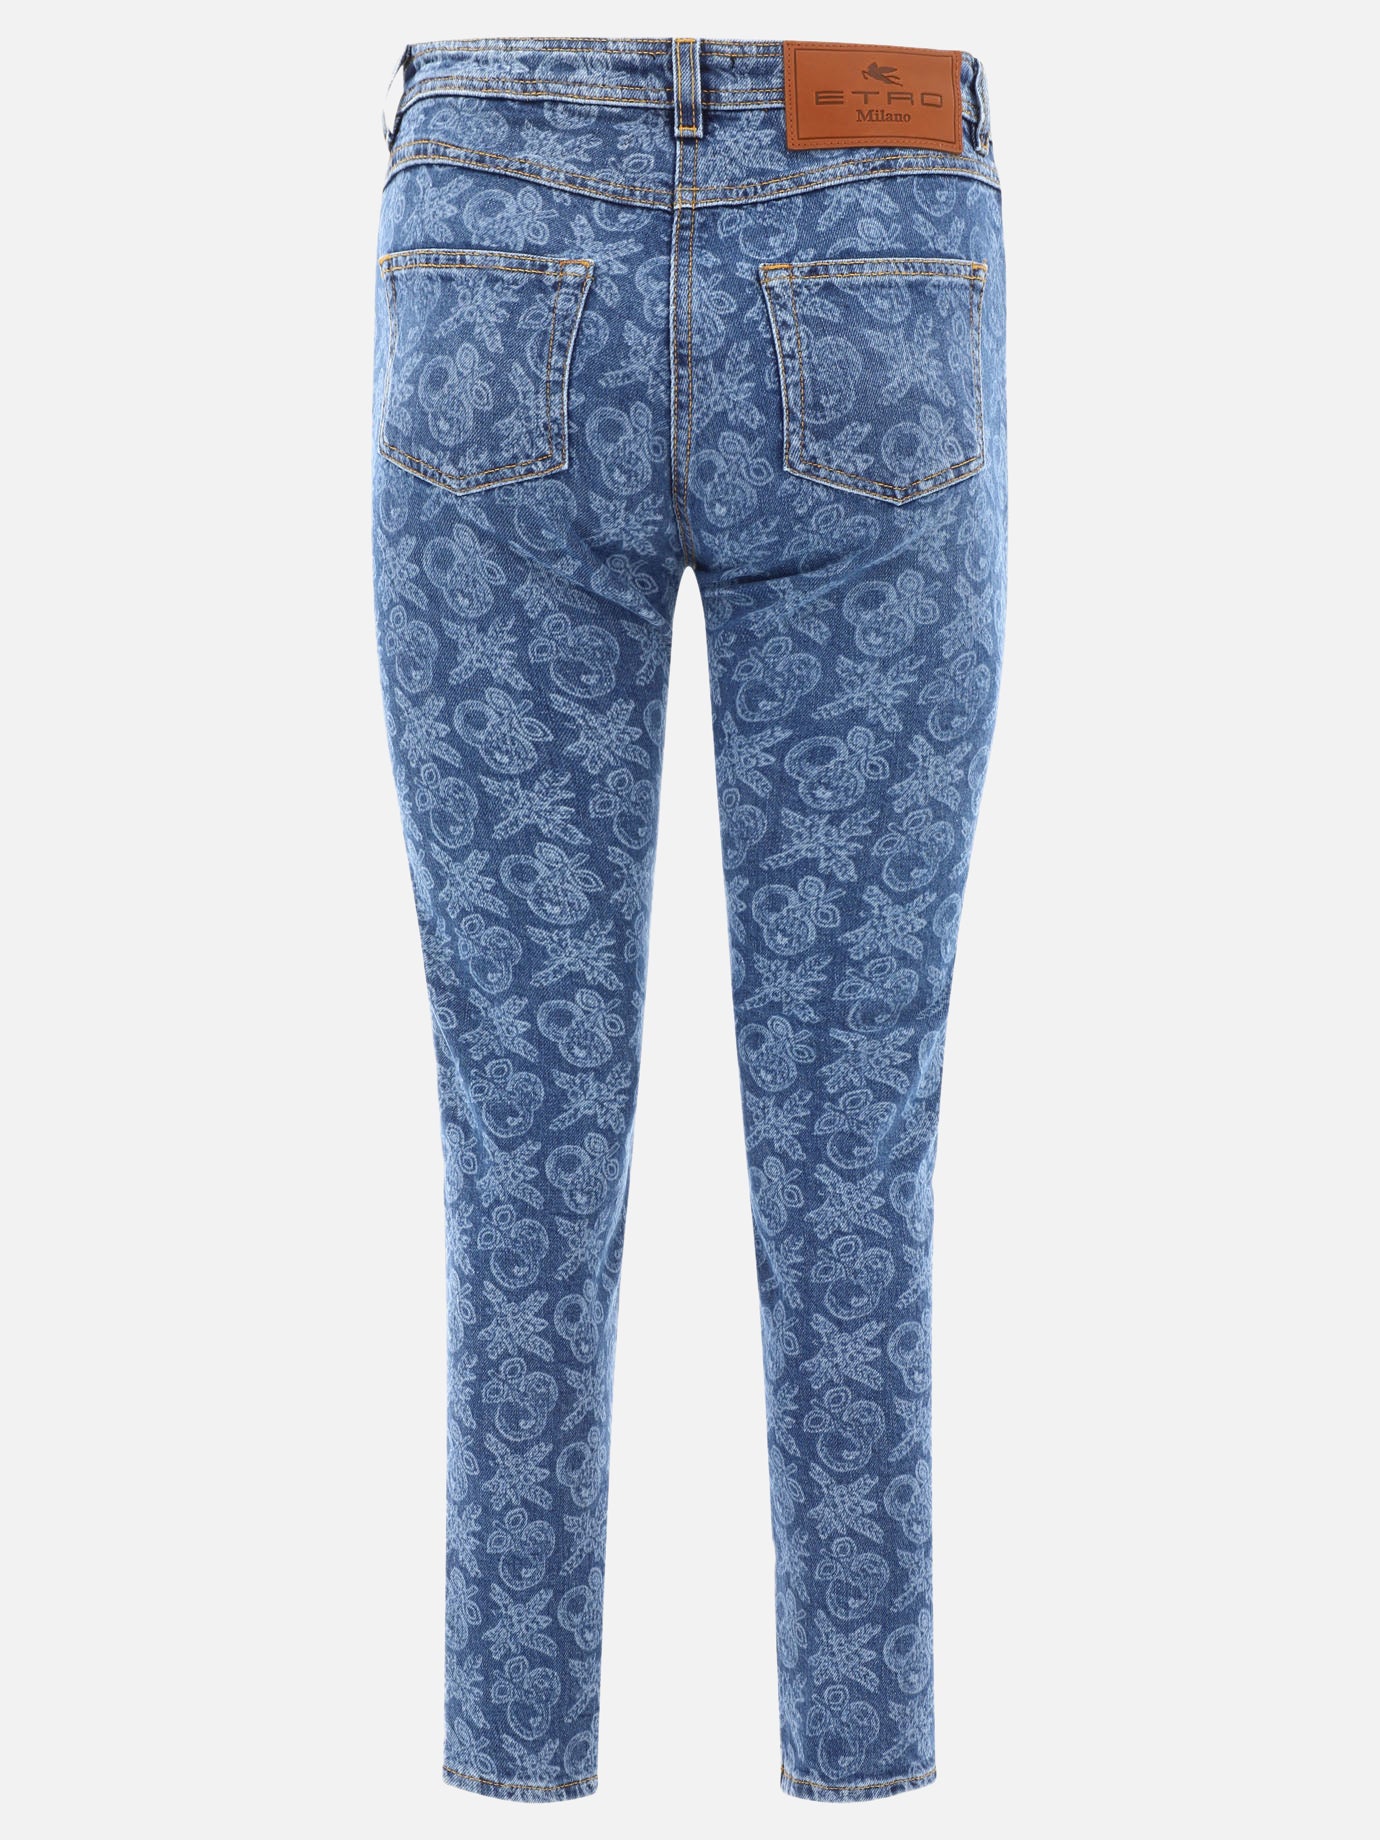 Jeans with lasered apples